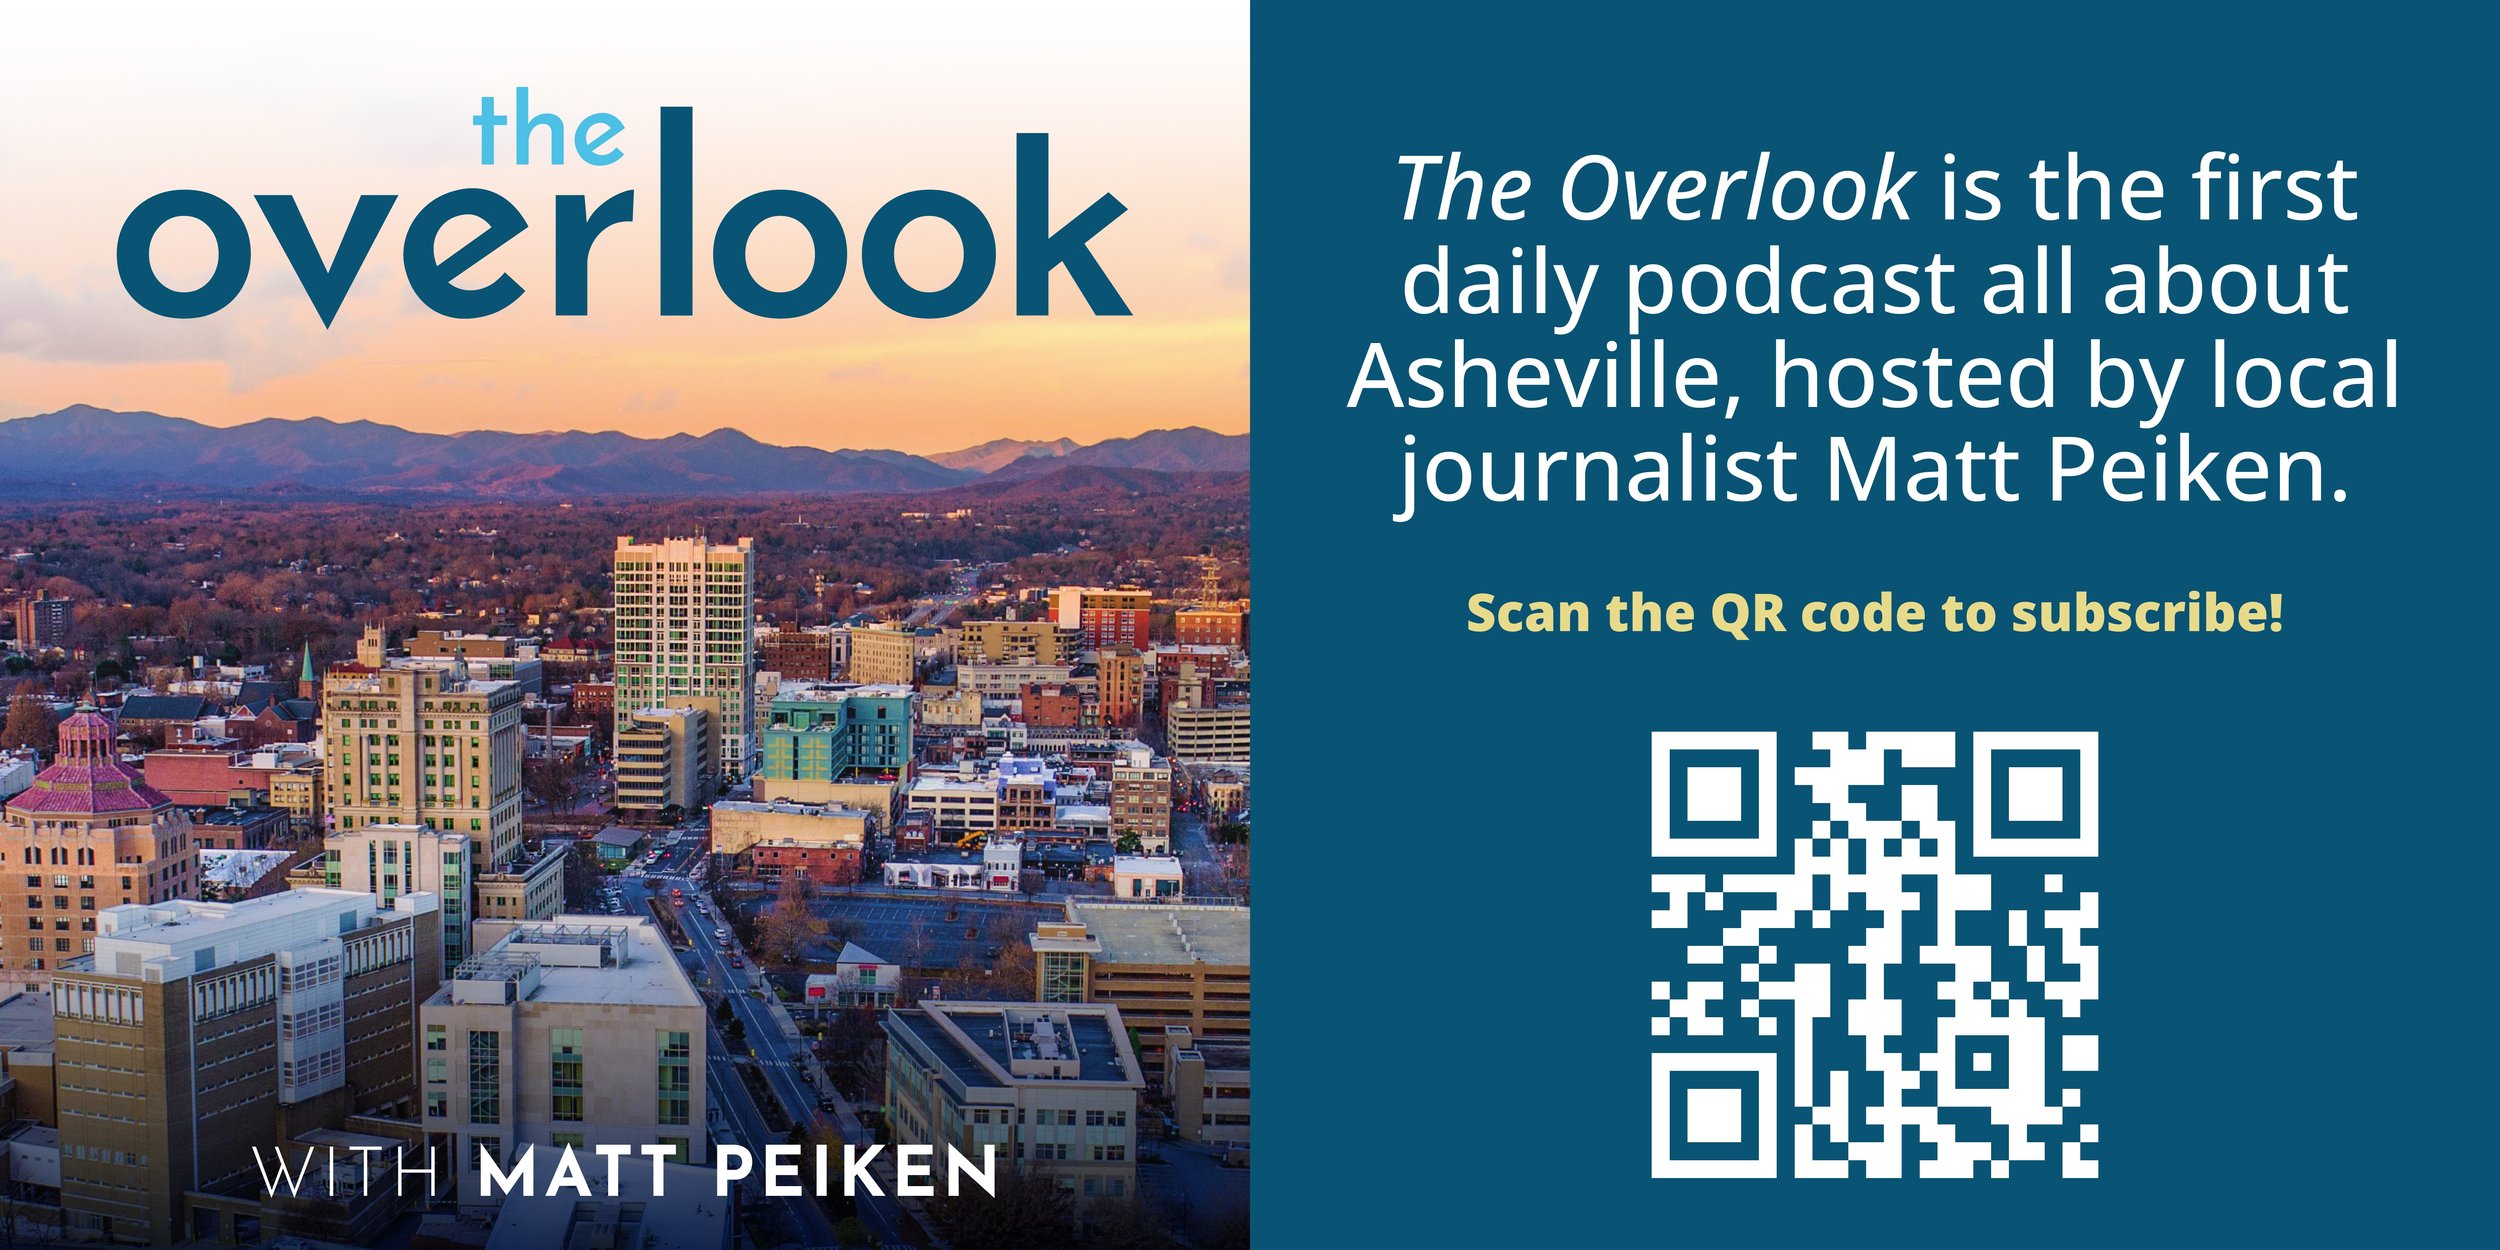 The_Overlook_Podcast_Magnetic_Ad_Updated.jpg